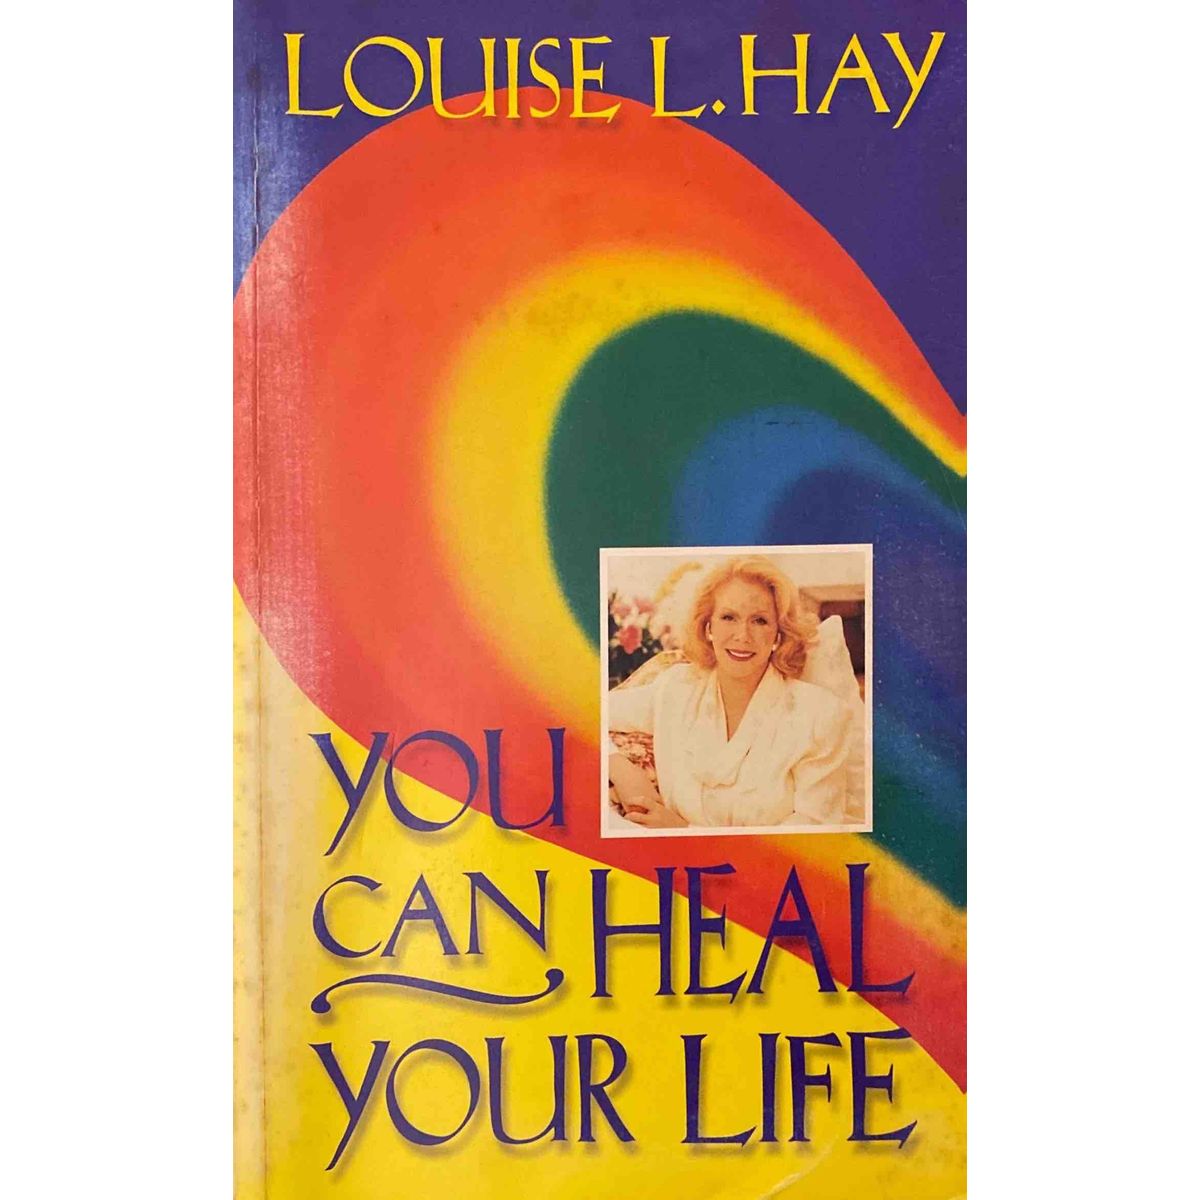 ISBN: 9780937611012 / 0937611018 - You Can Heal Your Life by Louise Hay [2002]